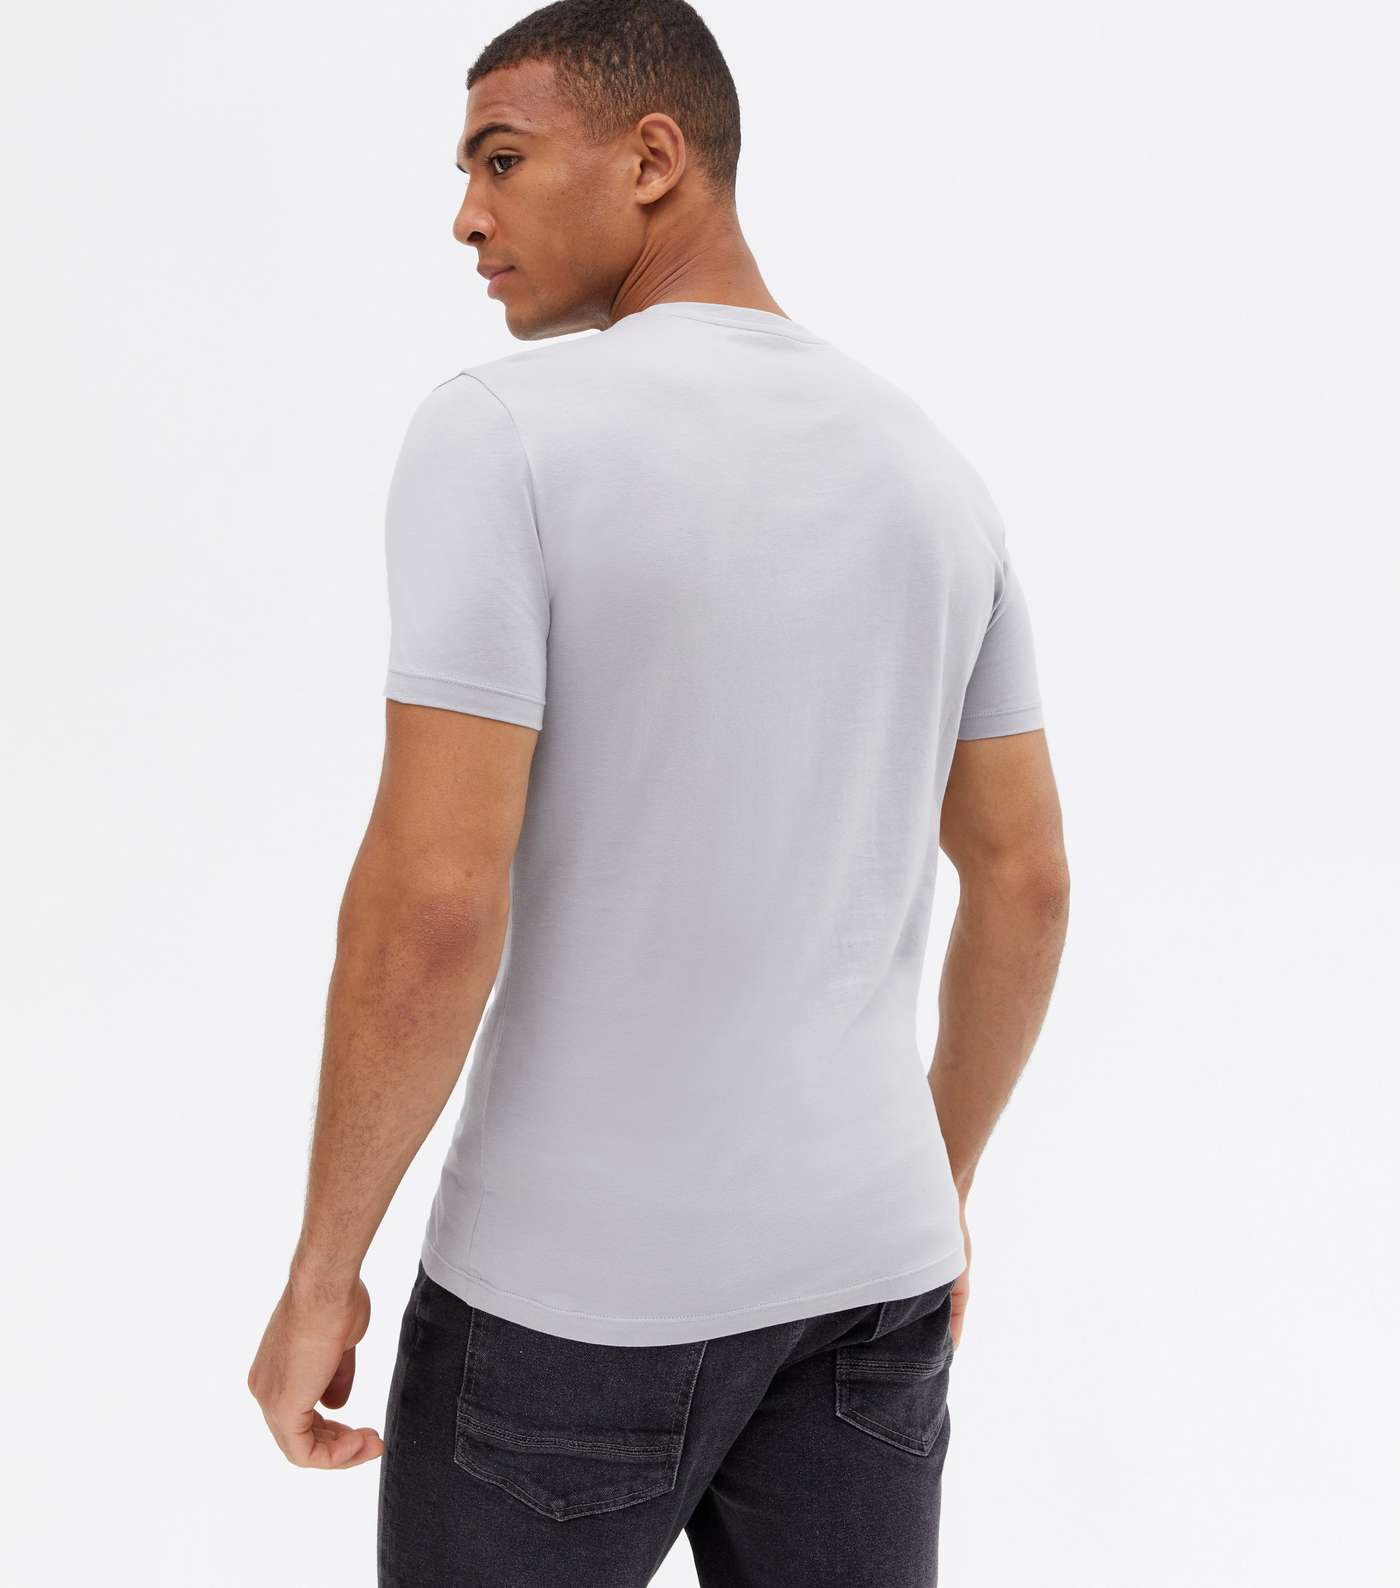 Pale Grey Muscle Fit Crew Neck T-Shirt Image 4